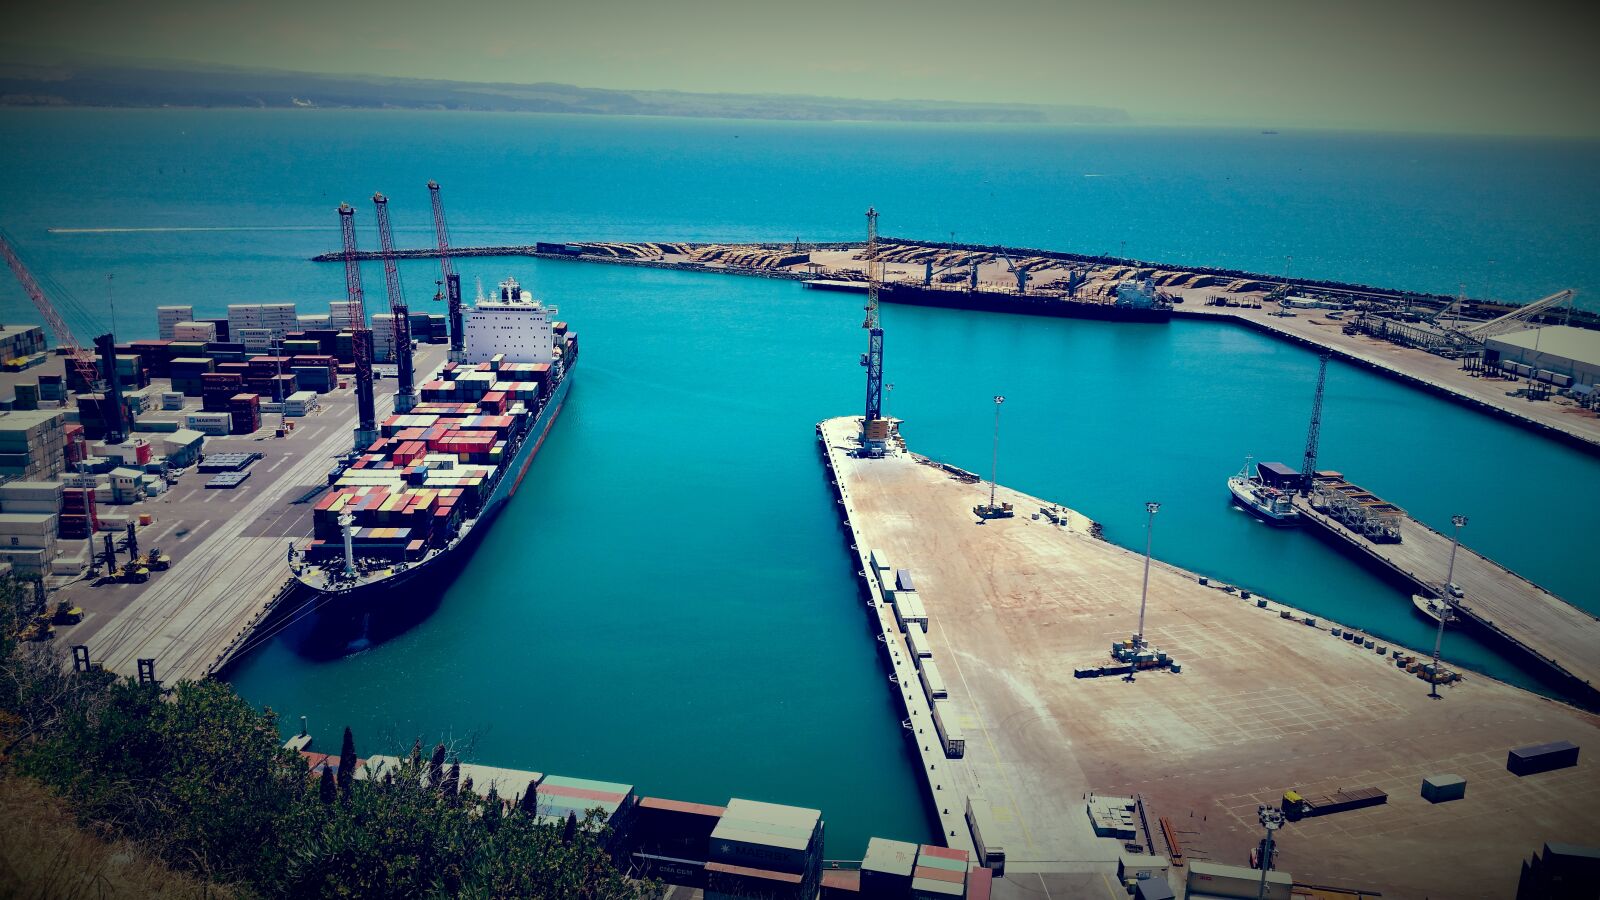 Samsung Galaxy S5 sample photo. Blue, container, ship, harbour photography